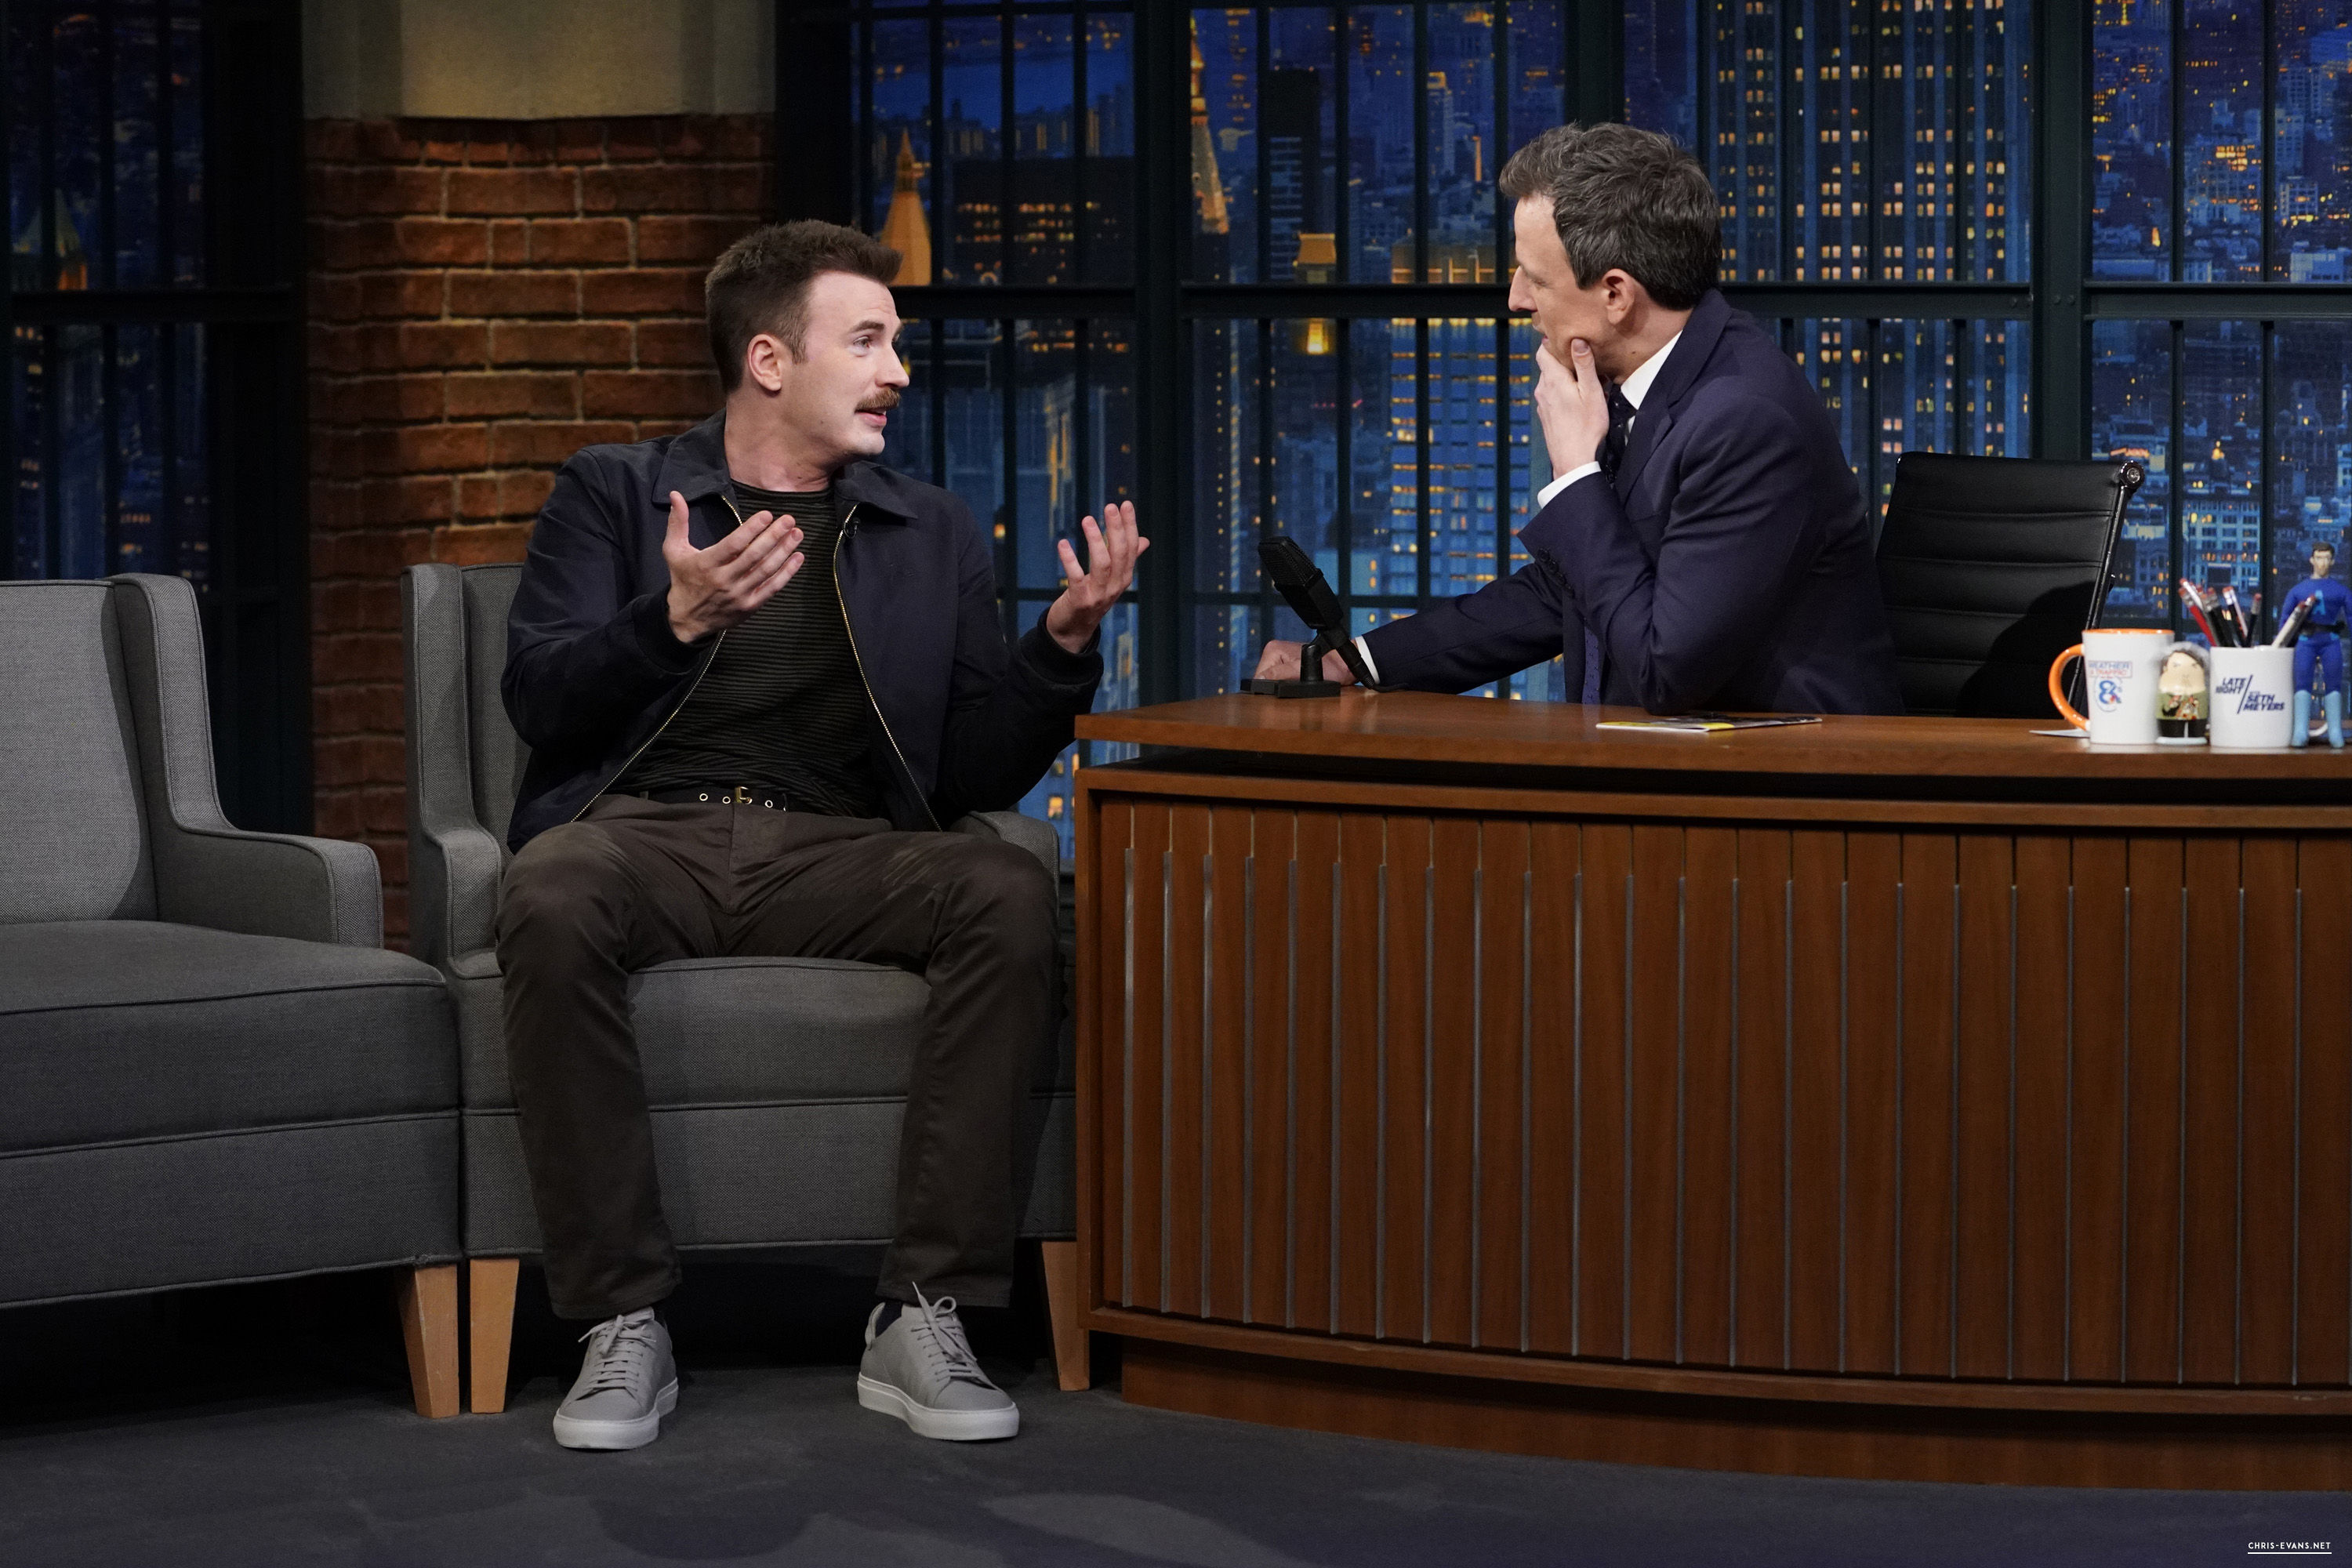 http://chris-evans.net/photos/albums/Appearances/2018/04%2023%20Late%20Night%20with%20Seth%20Meyers/006.jpg